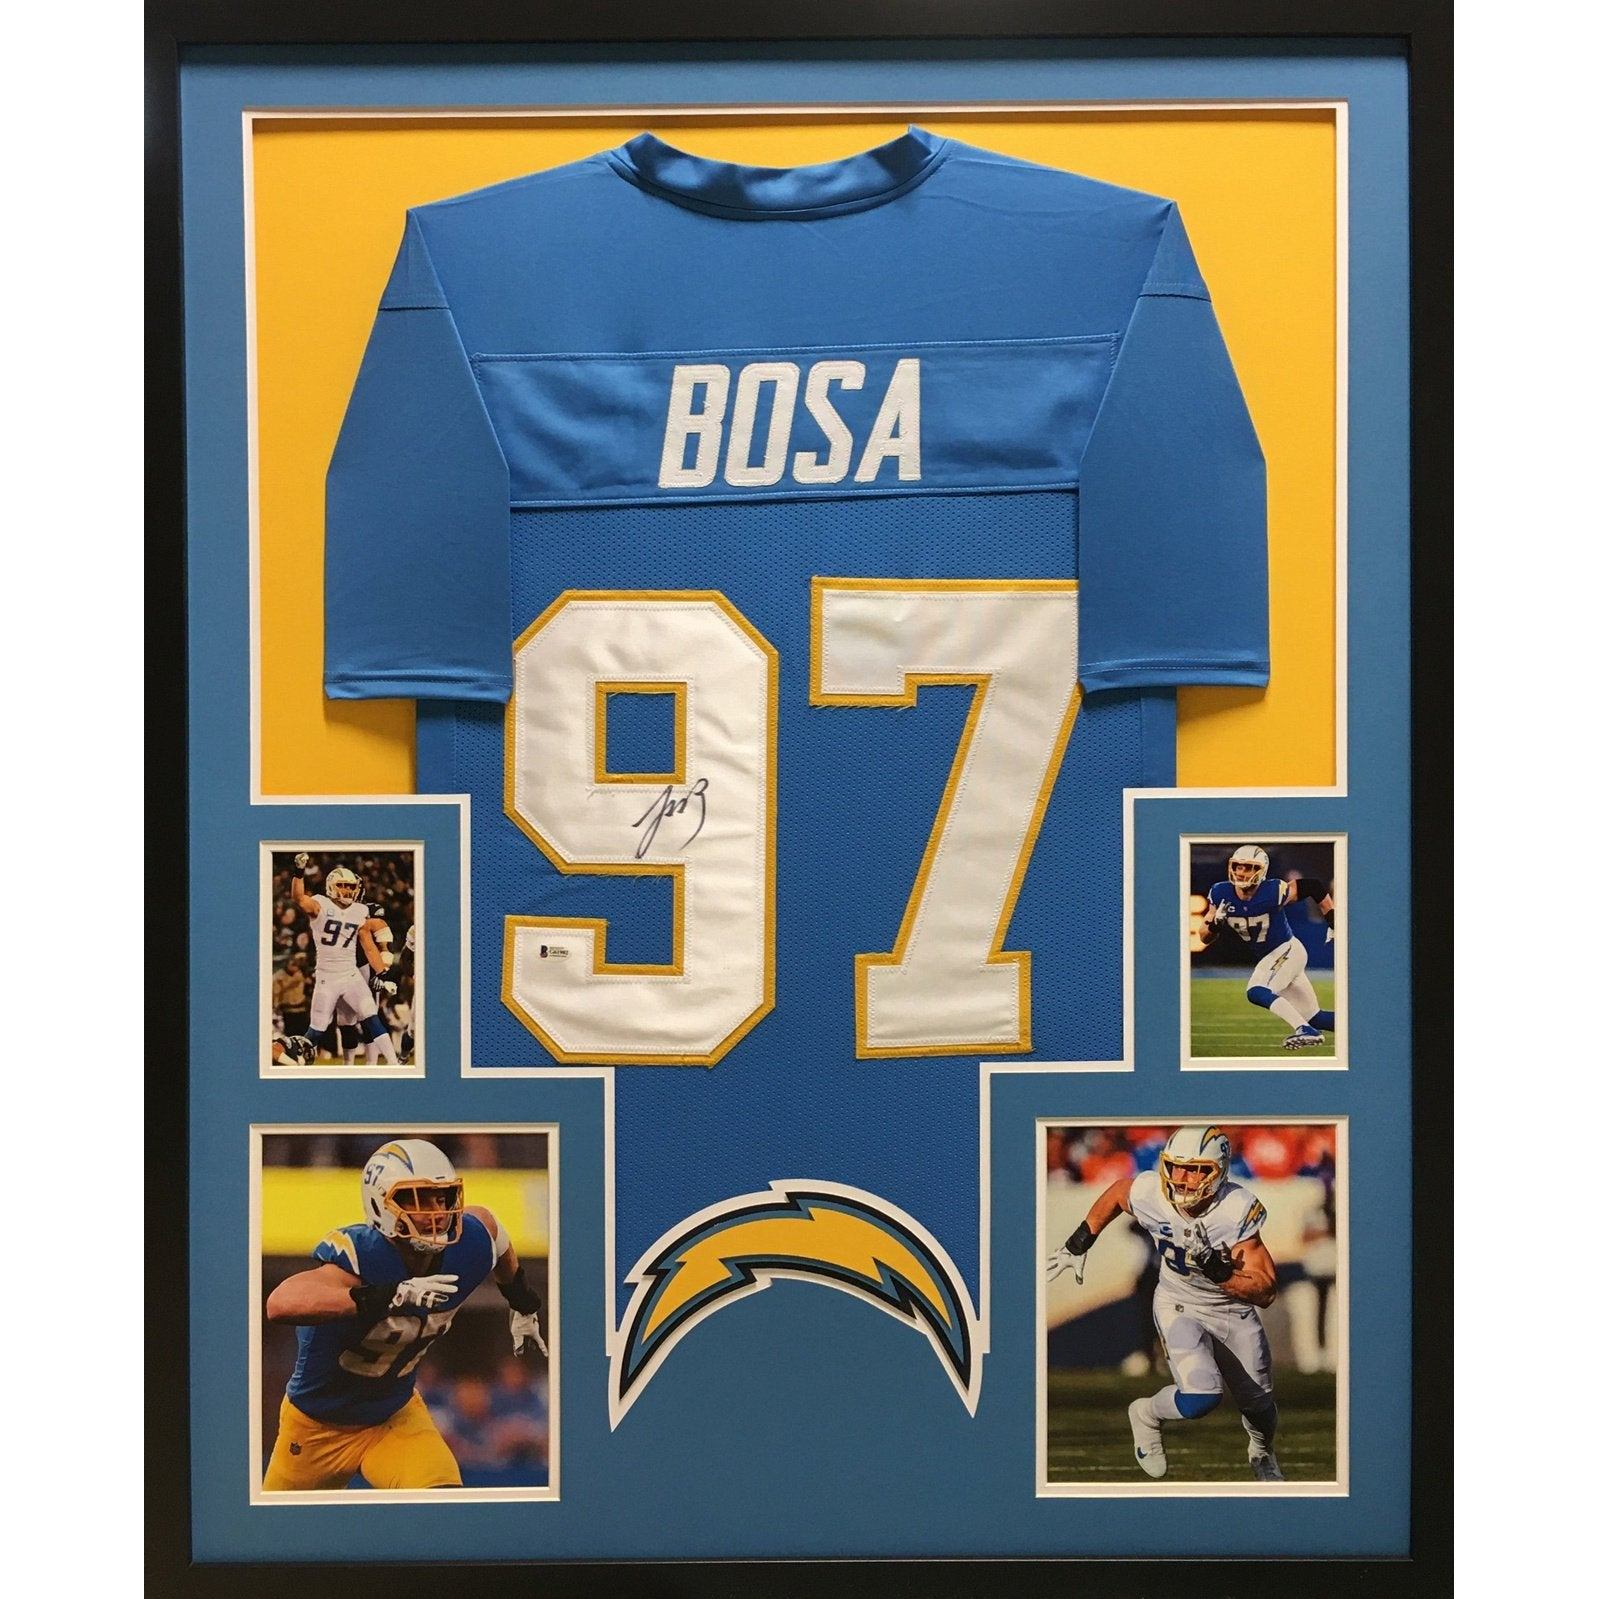 Joey Bosa Signed Framed Jersey Becket Autographed Los Angeles Chargers BAS